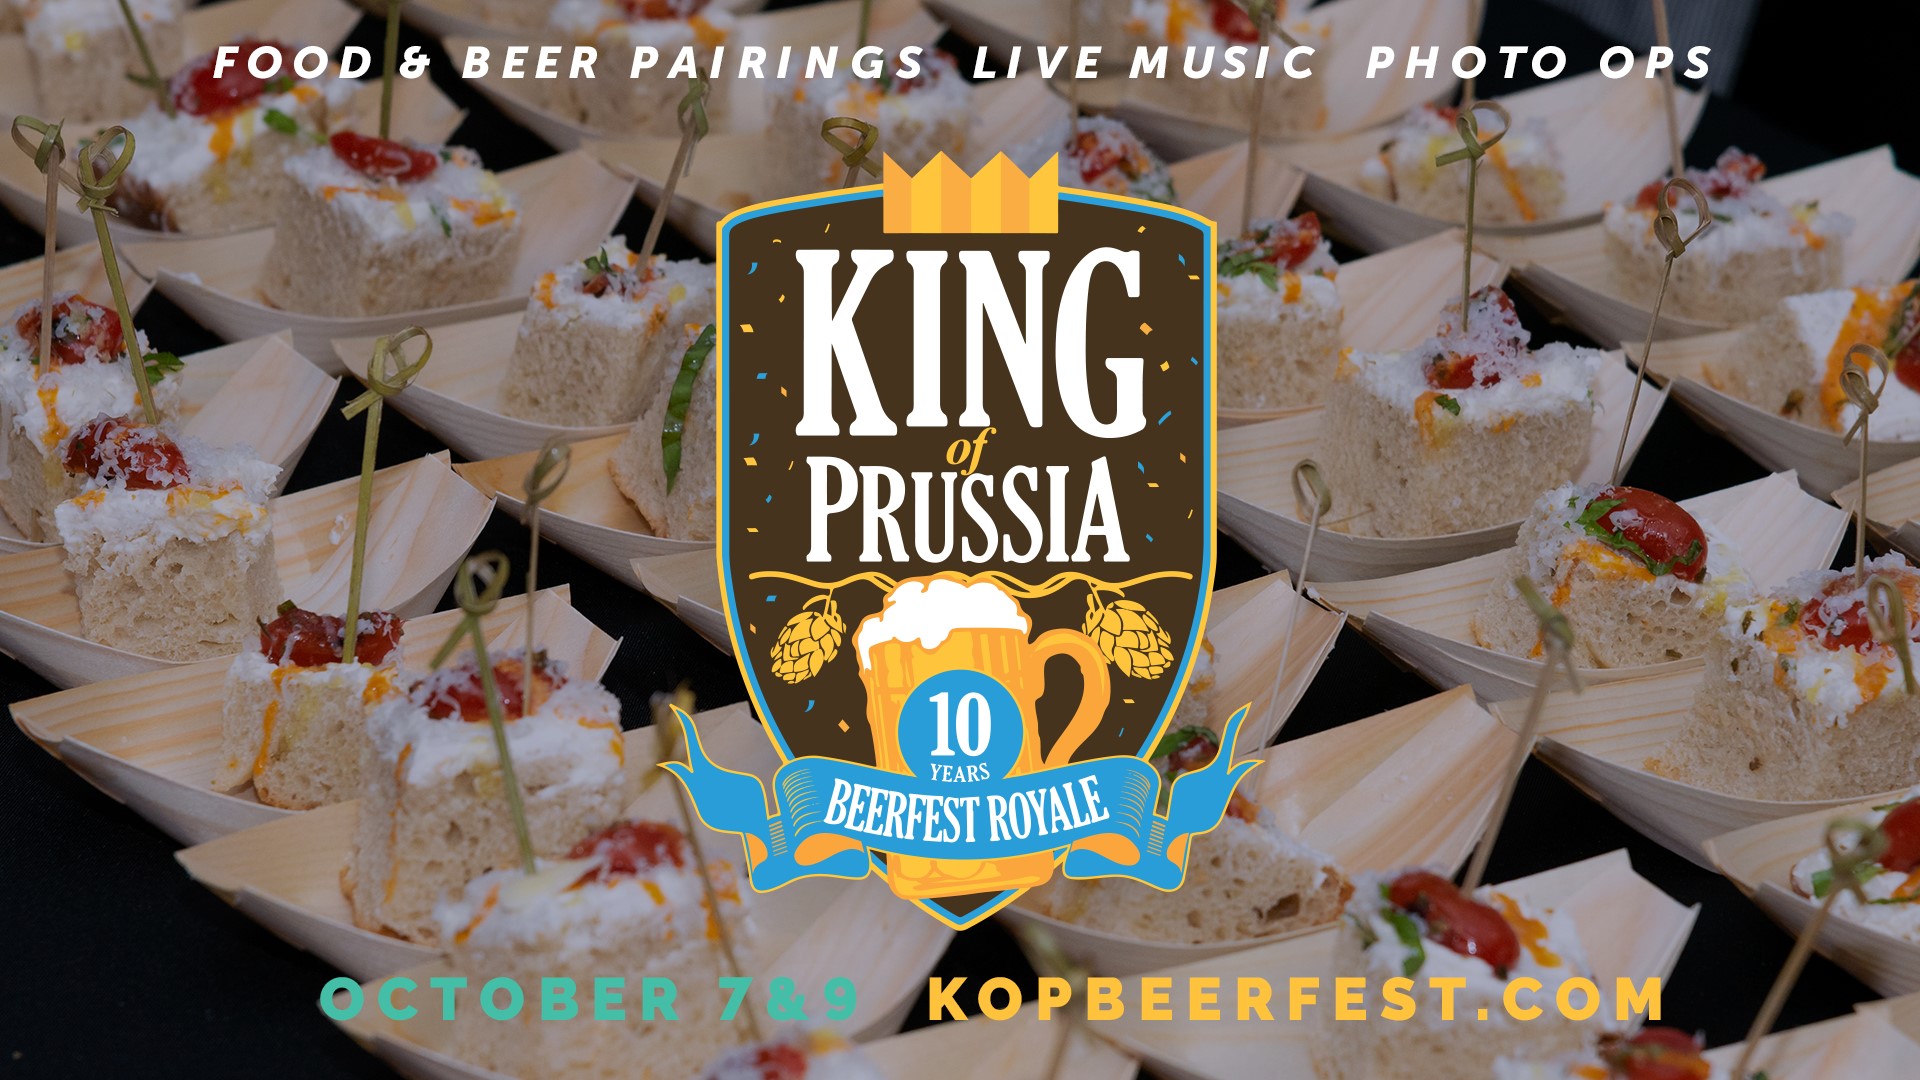 King of Prussia Beerfest logo over image of food